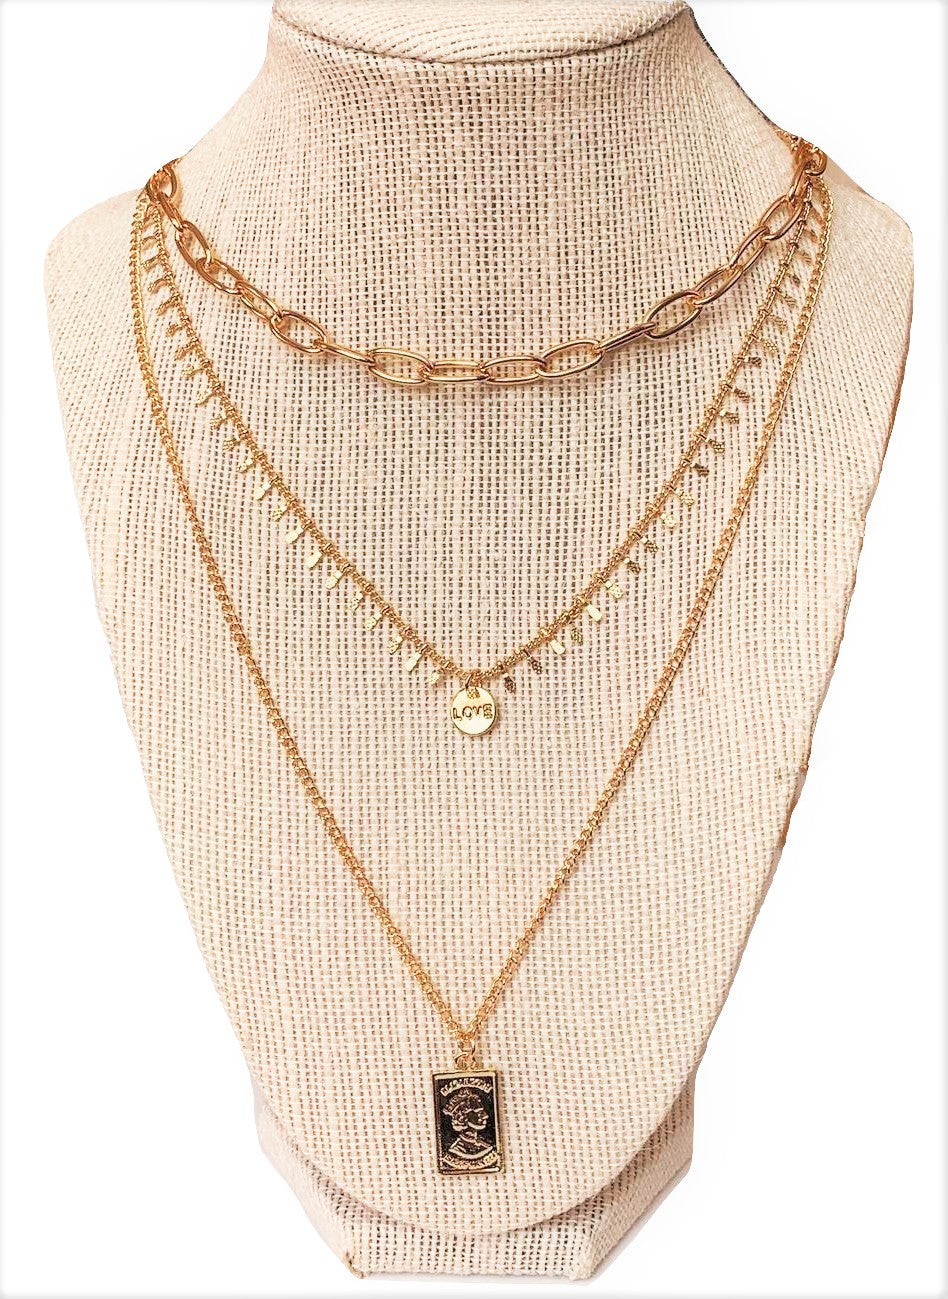 Three Layer Necklace with a Rectangle Pendant-Hollywood Sensation®